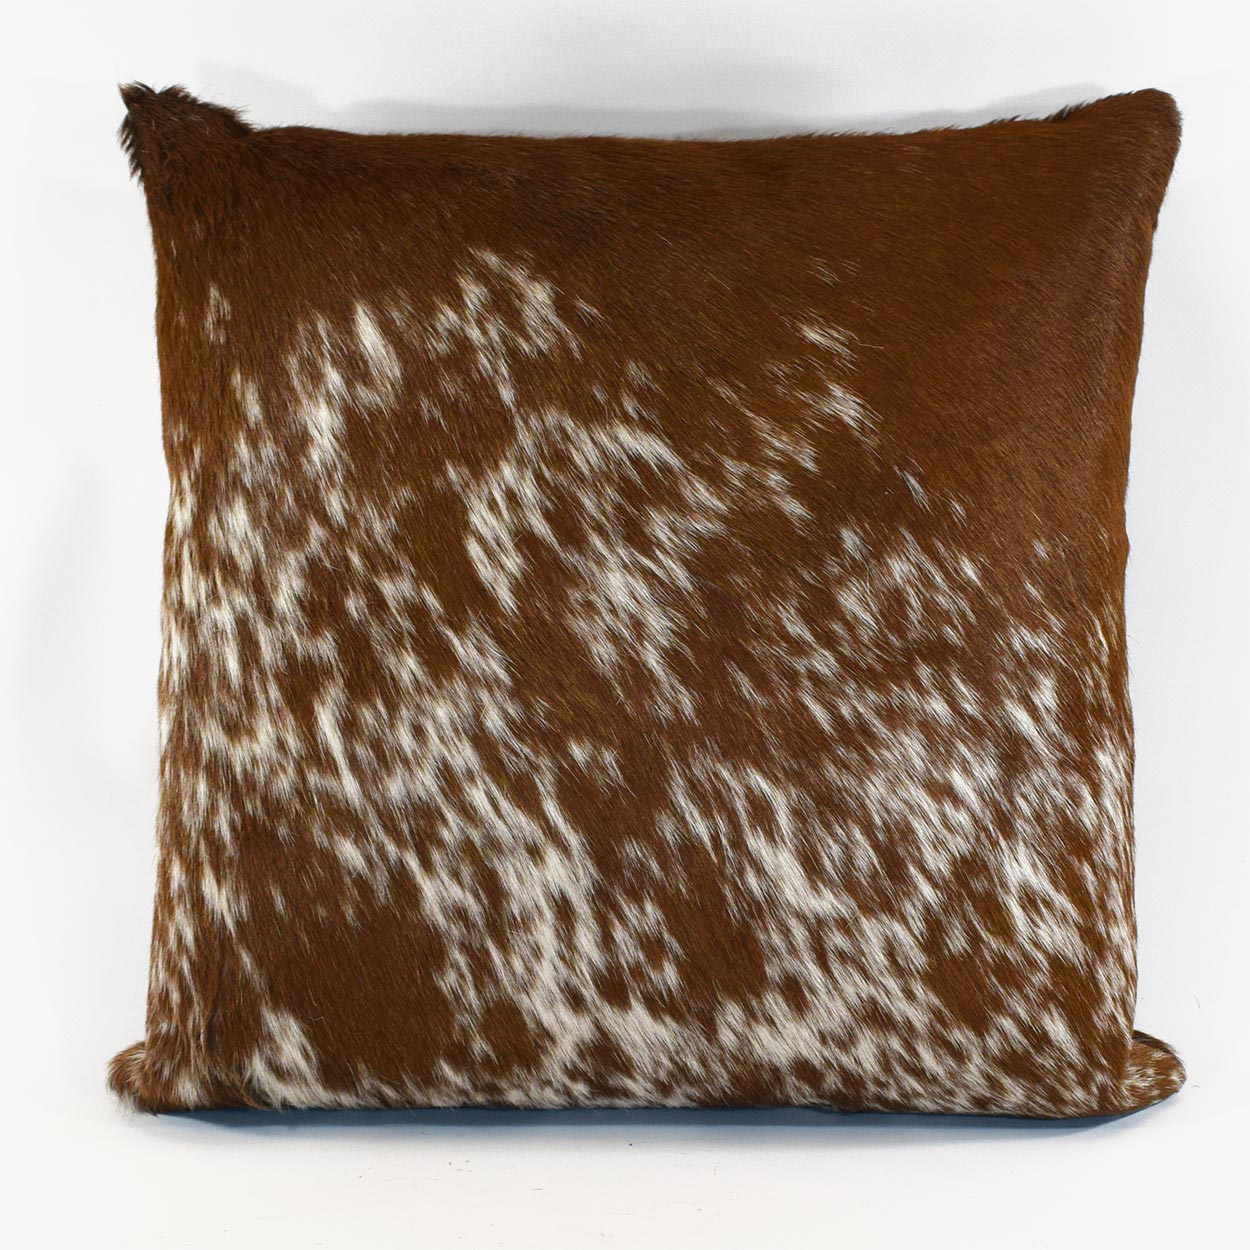 322064-1 - 20 x 20 Cowhide Pillow Salt Pepper Mostly Brown 322064-1